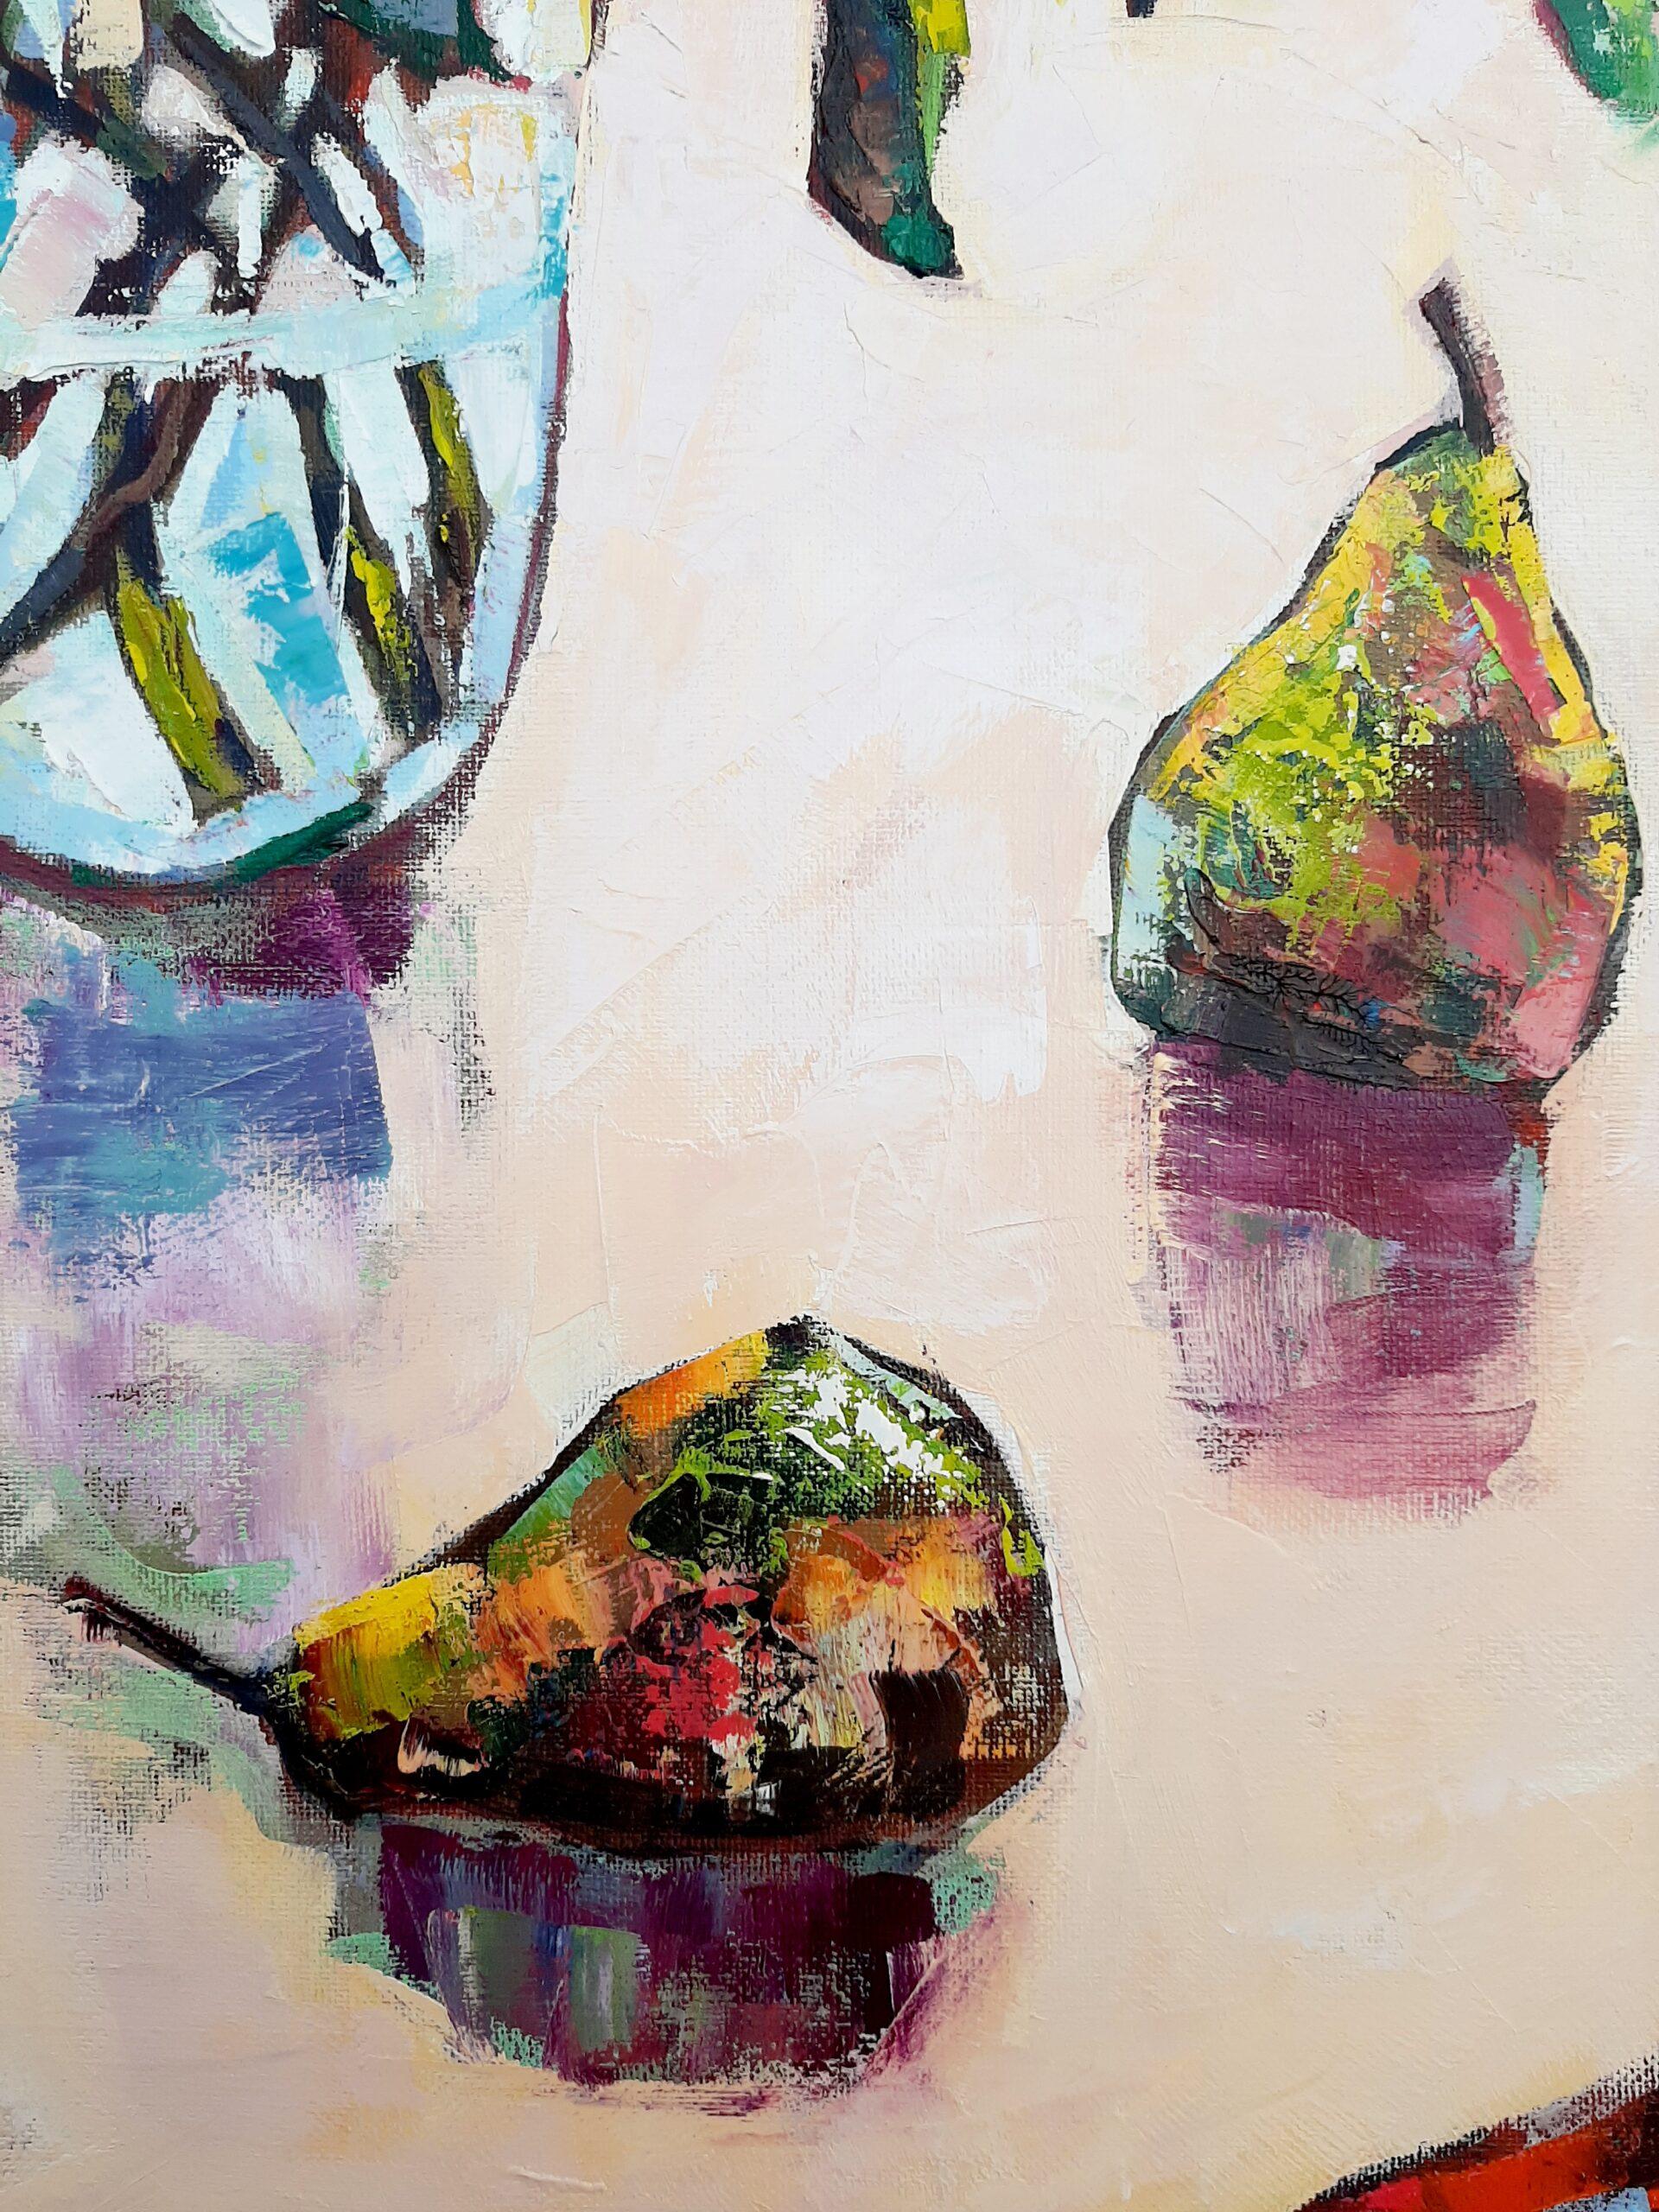 Of Polish descent and now living in London, Ania Pieniazek creates bold, bright art full of everyday joy and pleasure.  Influenced by Gustav Klimt, Paul Gauguin and Zbyslaw Marek Maciejewski amongst others, her work observes simple scenes of fruit,